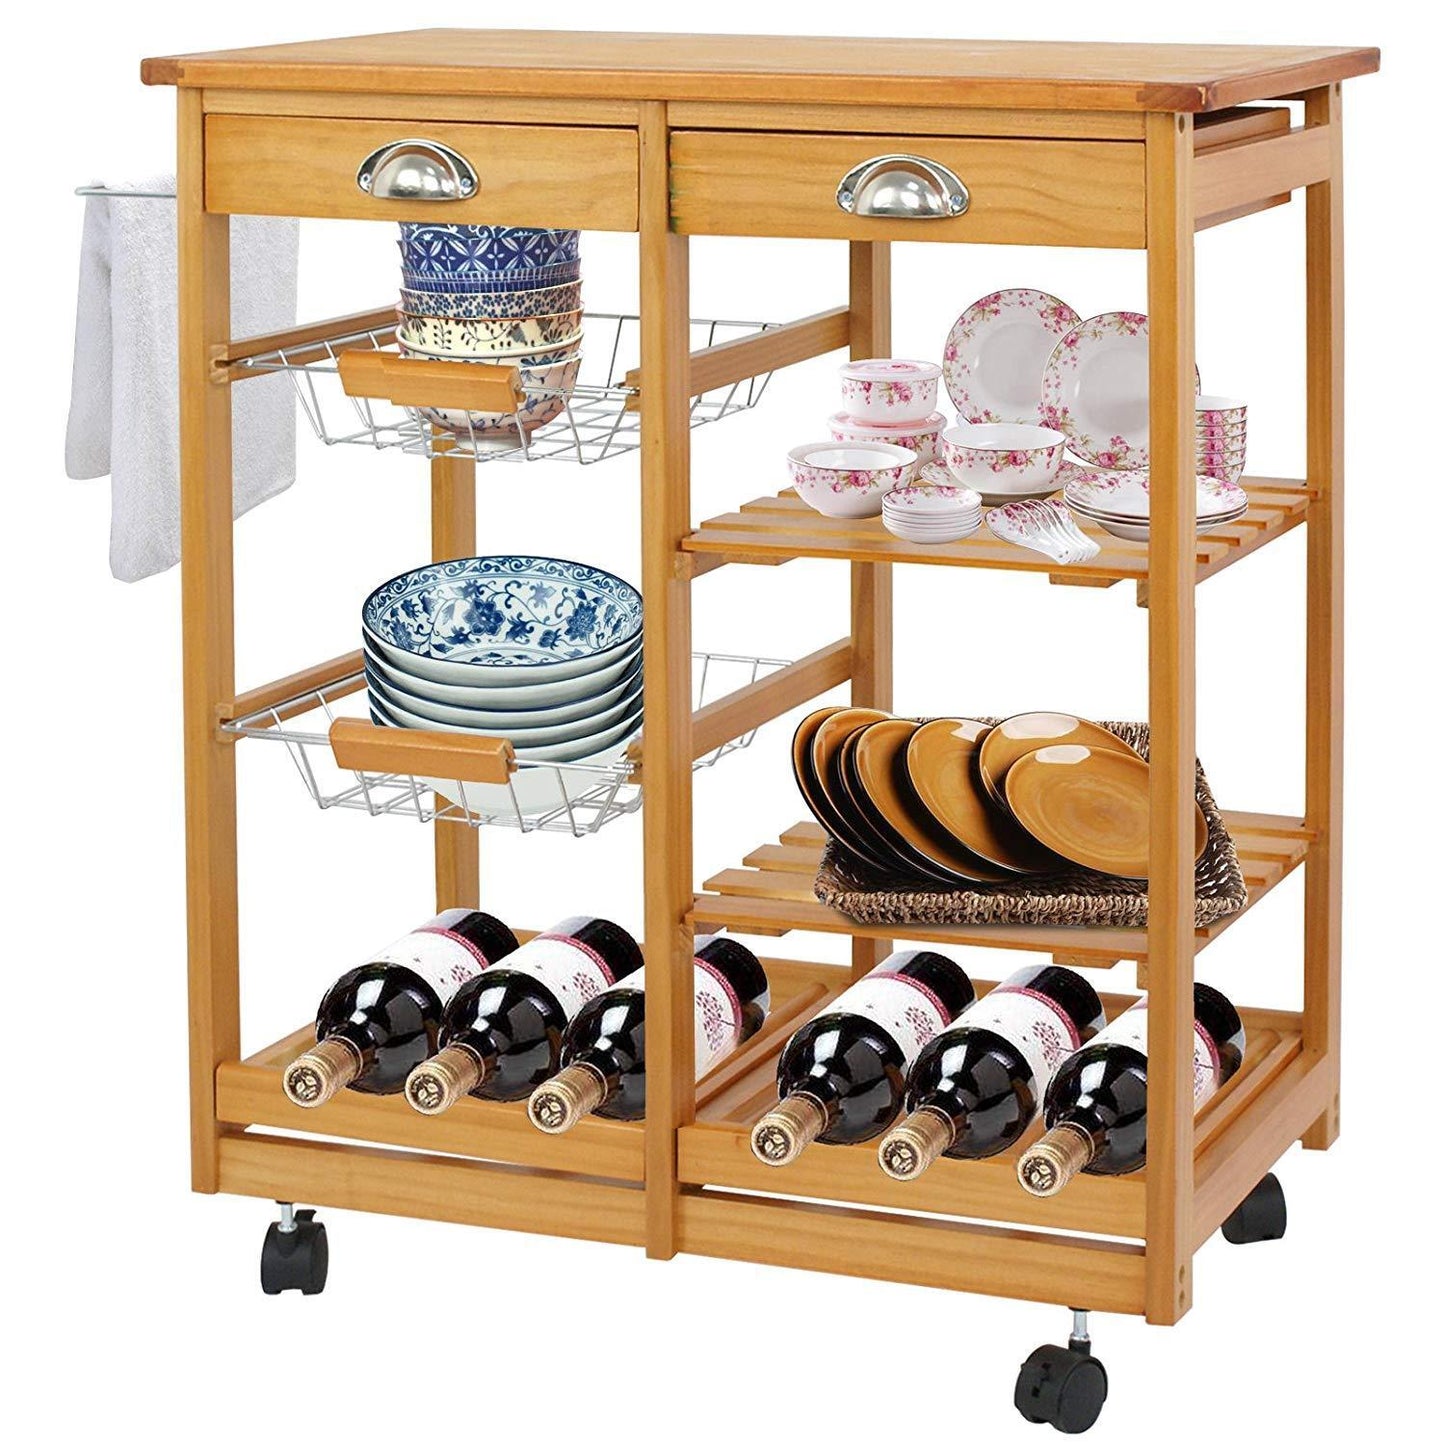 Wood Kitchen Storage Island Cart Dining Trolley Basket Stand Counter Top Table